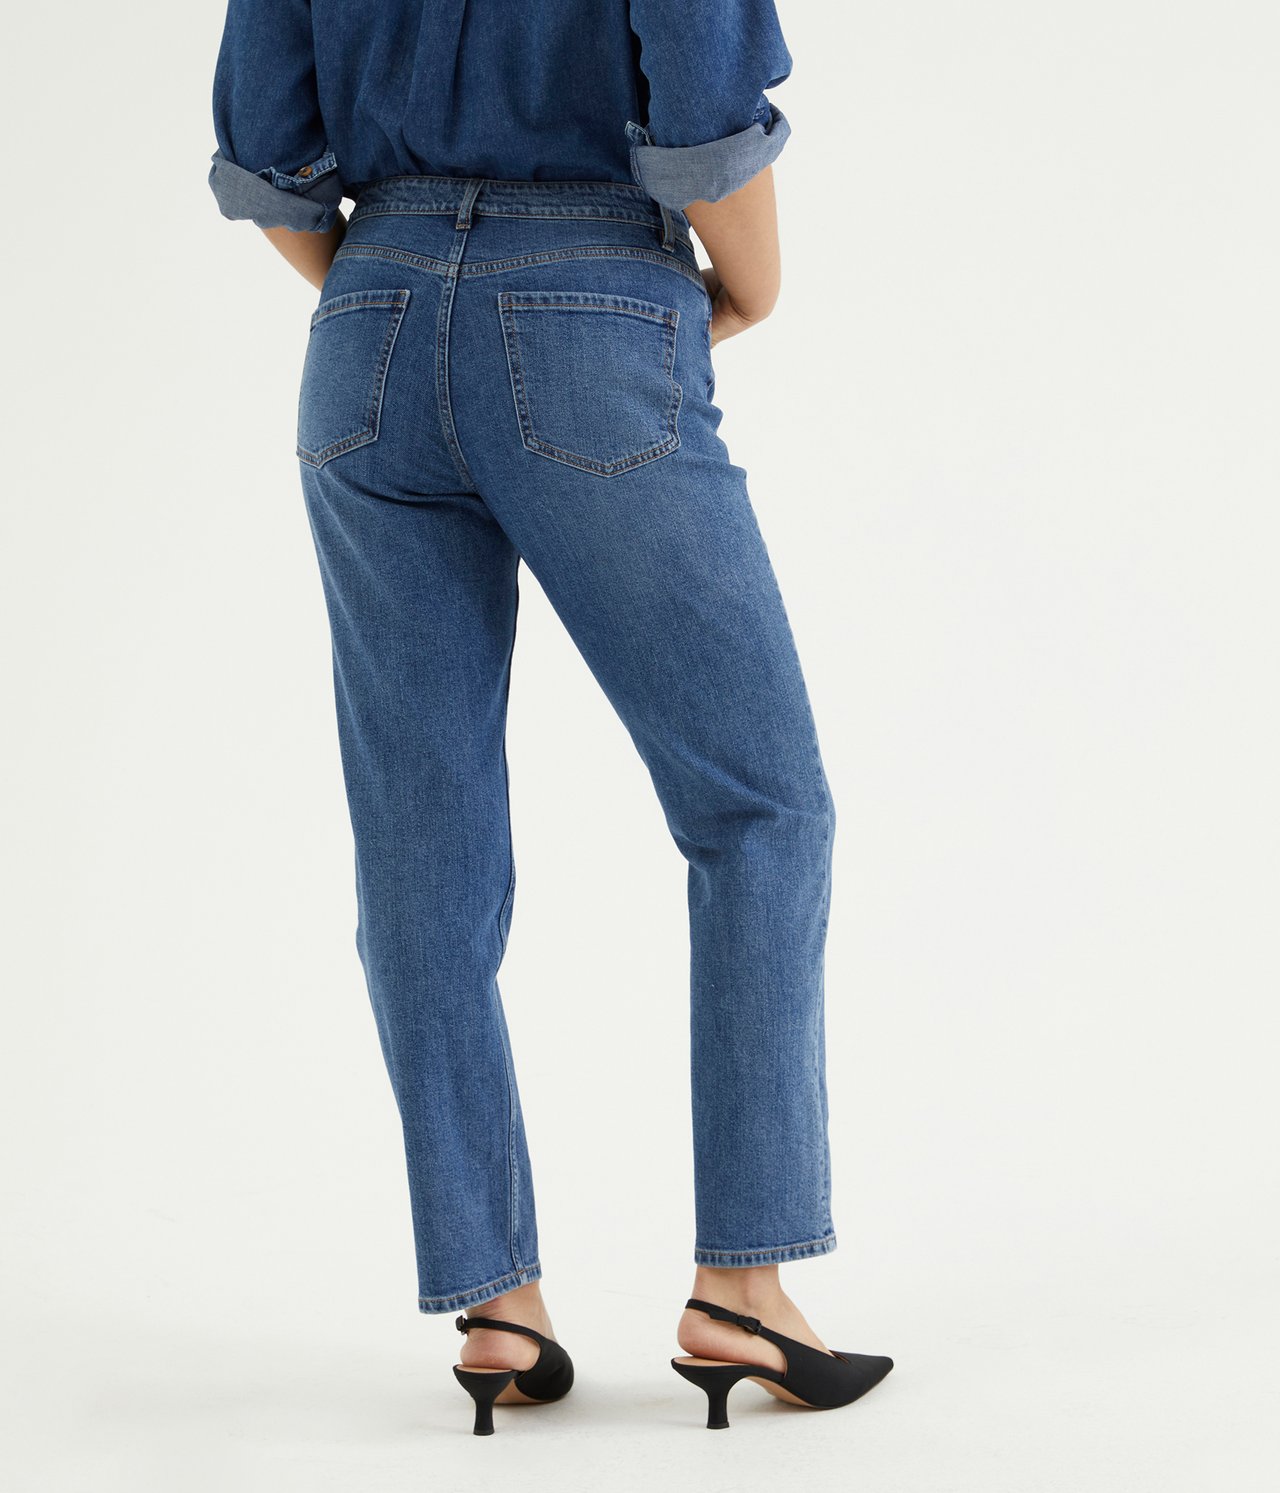 Jeans high waist tapered - Denimi - 7